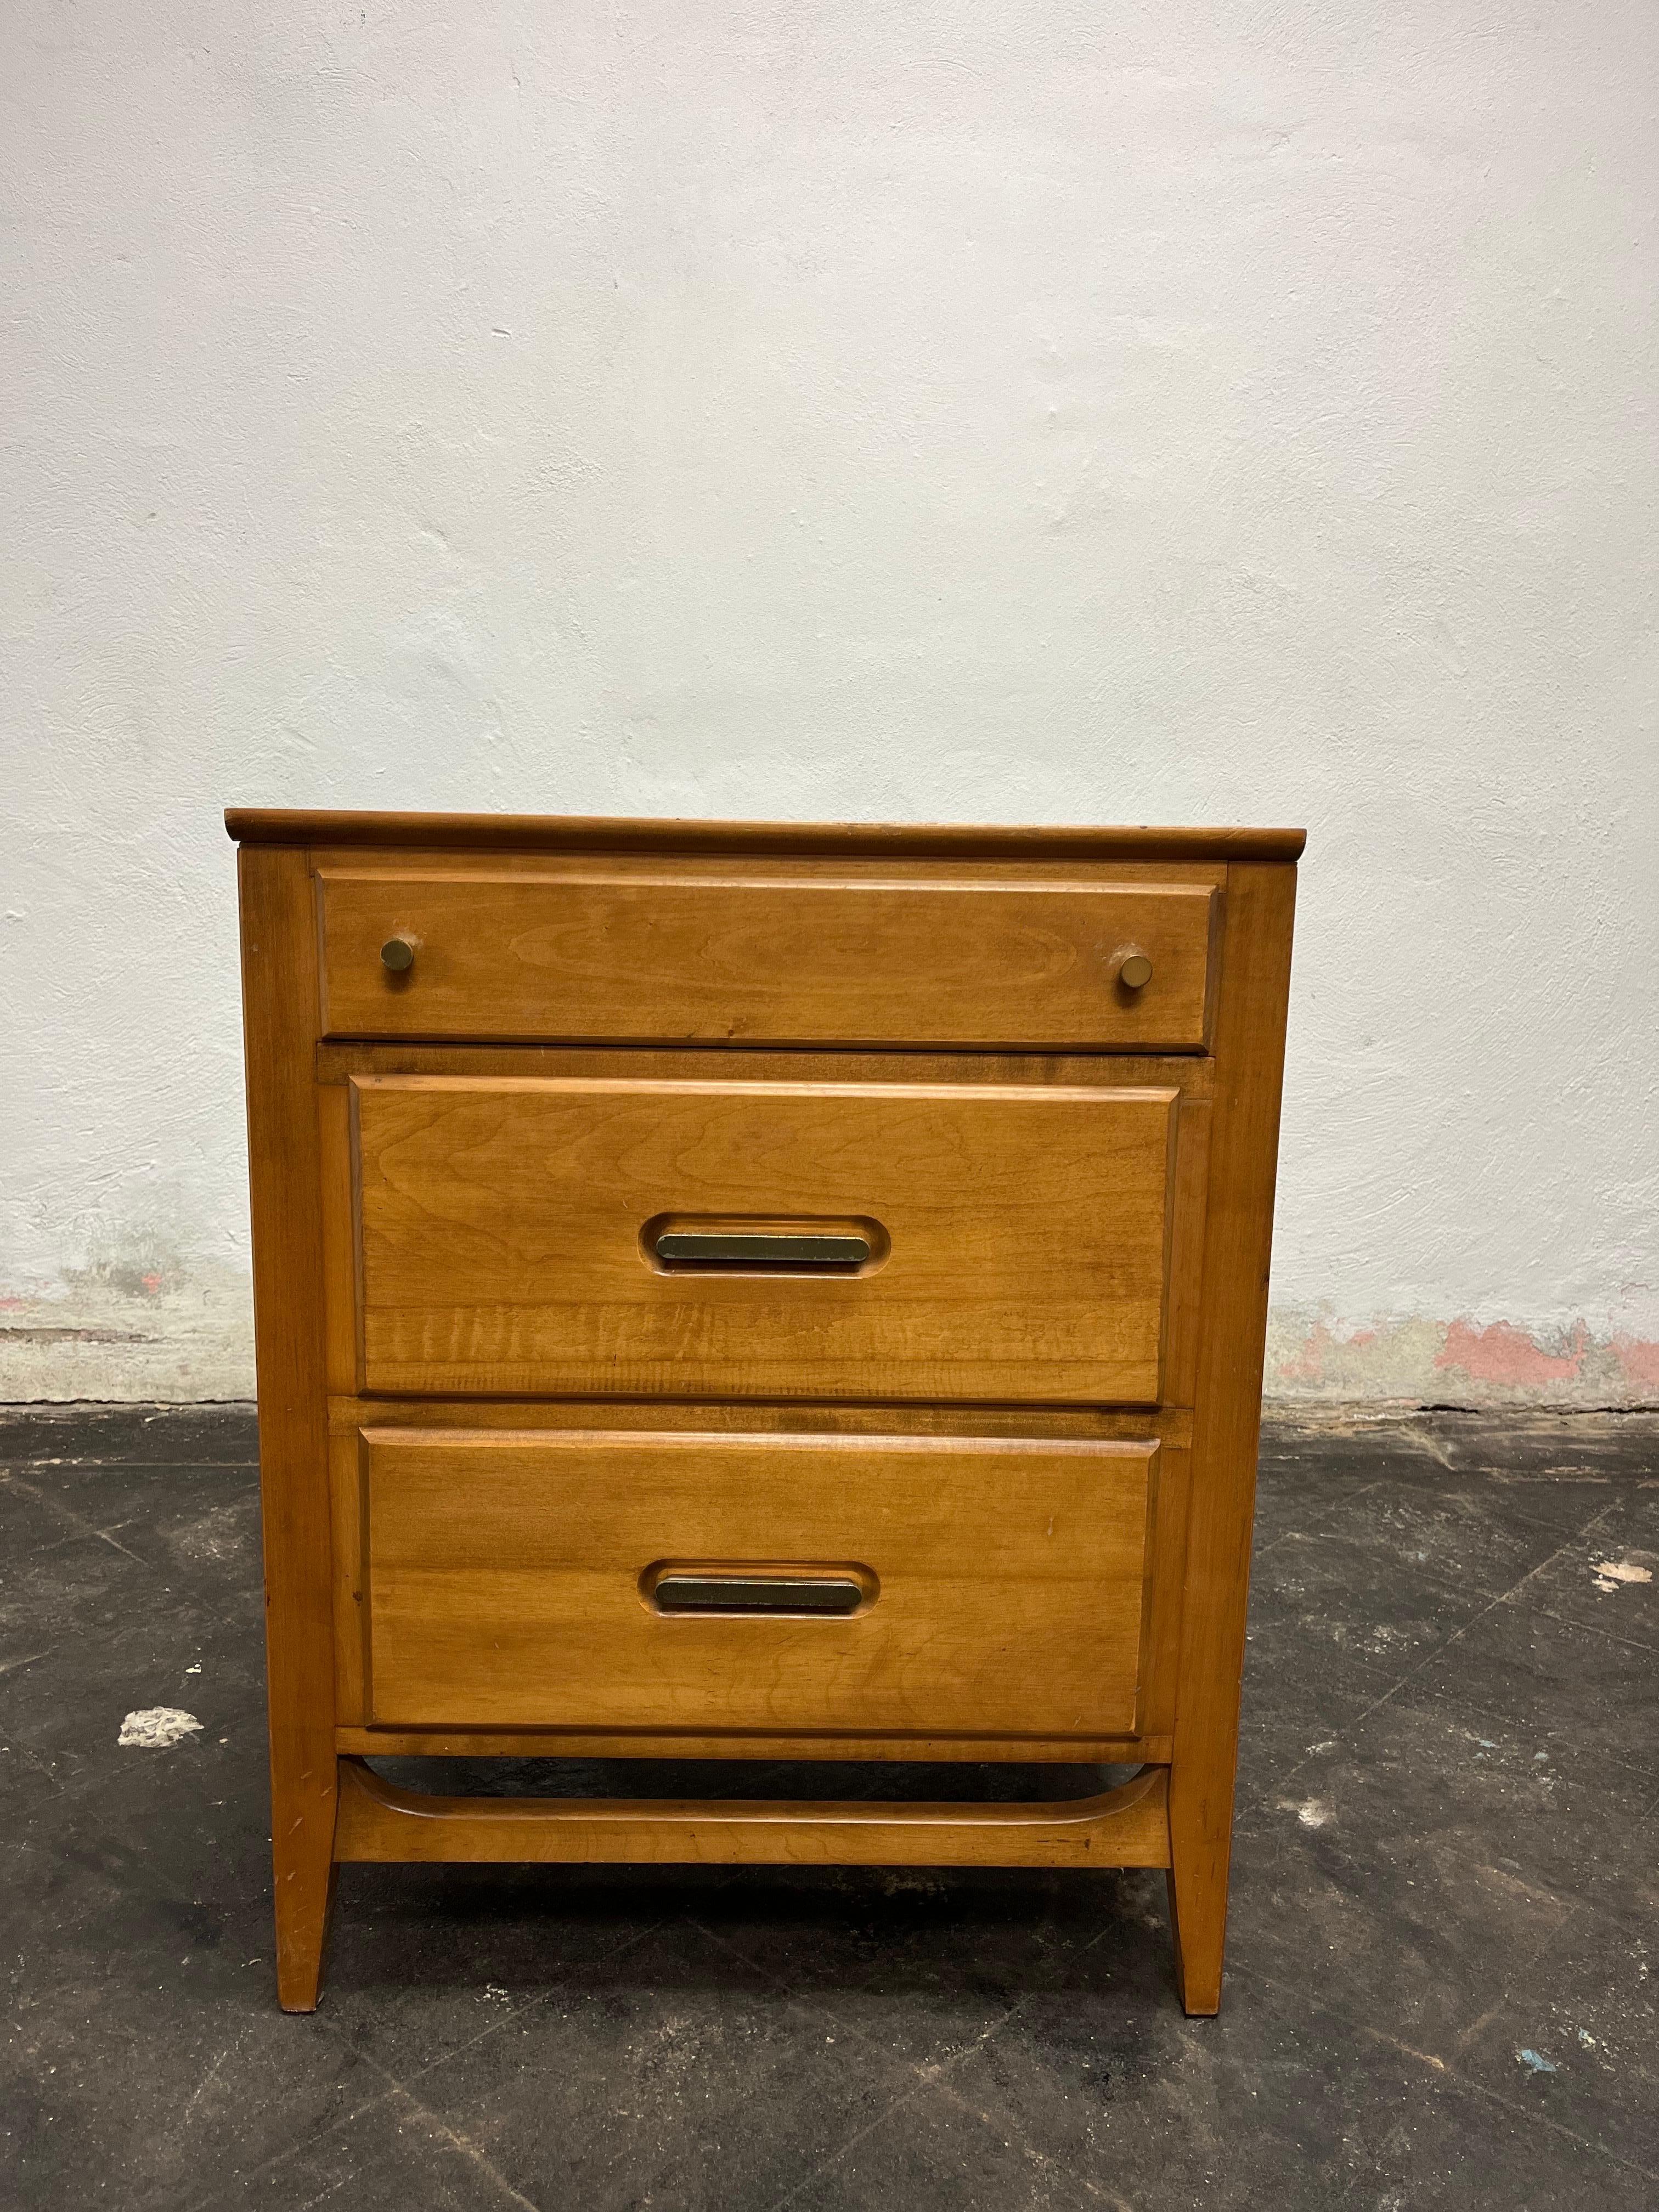 Unique mid century cabinet. Sequence line for Sun Glow. Sleek sophisticated lines. Petite brass drawer pulls and streamline handles.
Curbside to NYC/Philly $400